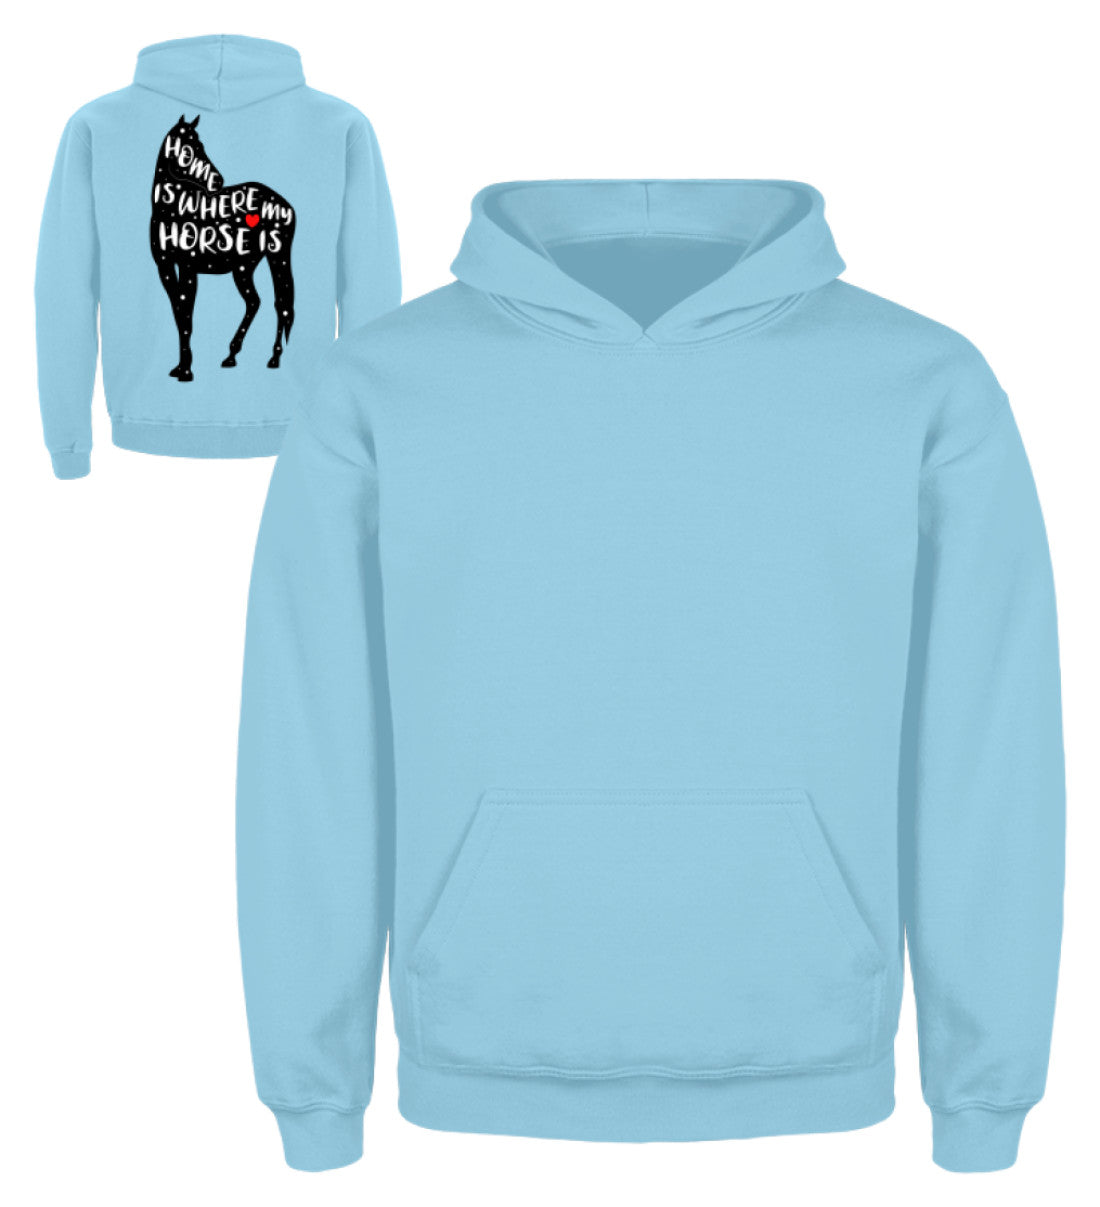 Zeigt funny adorable horse saying kinder hoodie in Farbe Feuerrot